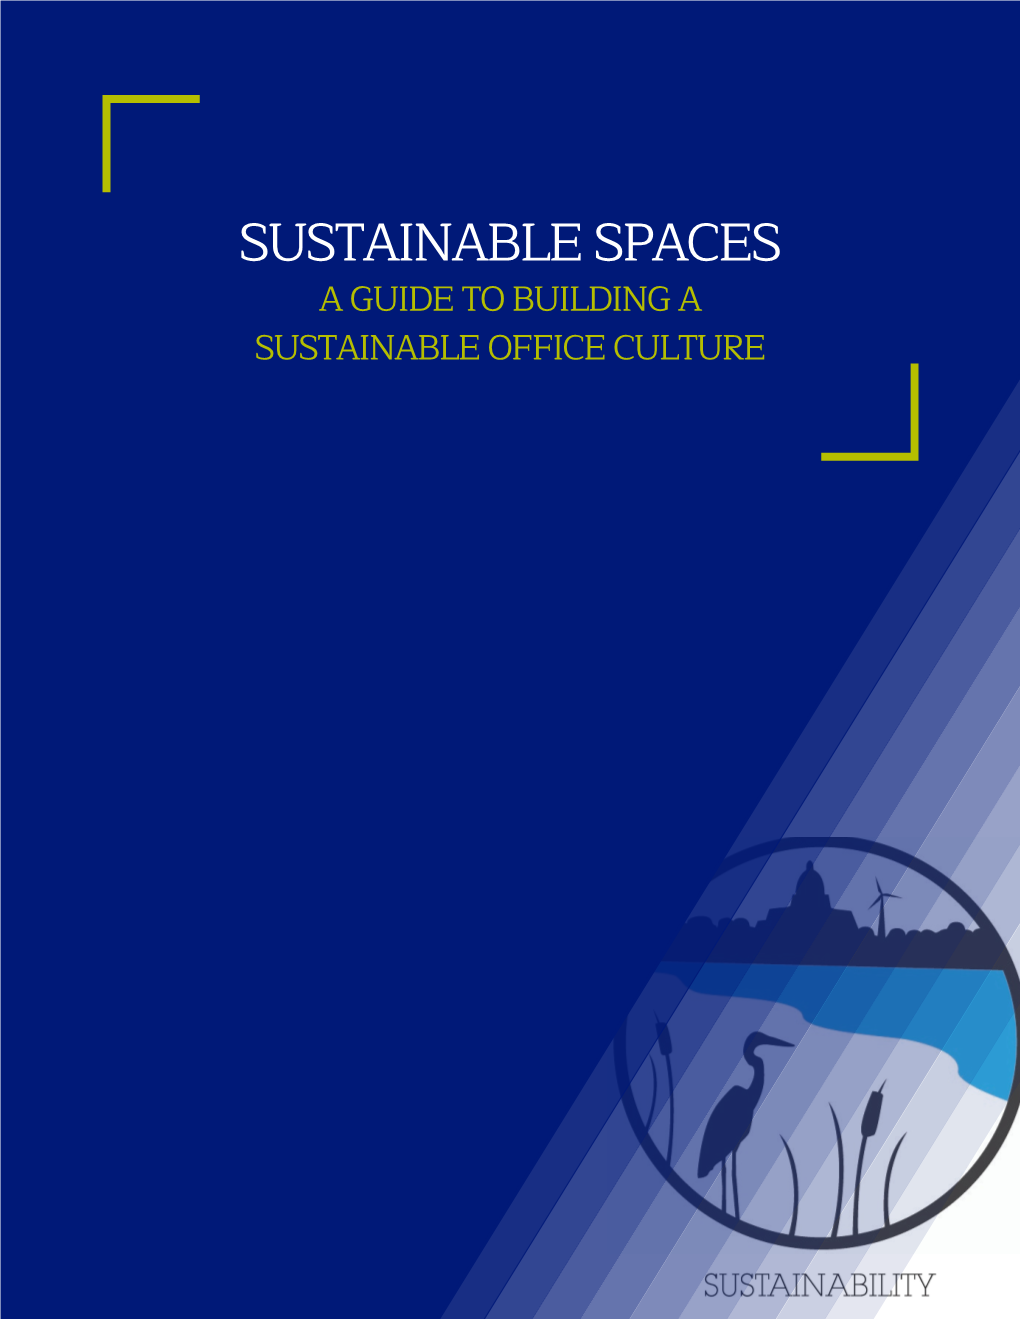 Building Sustainable Spaces